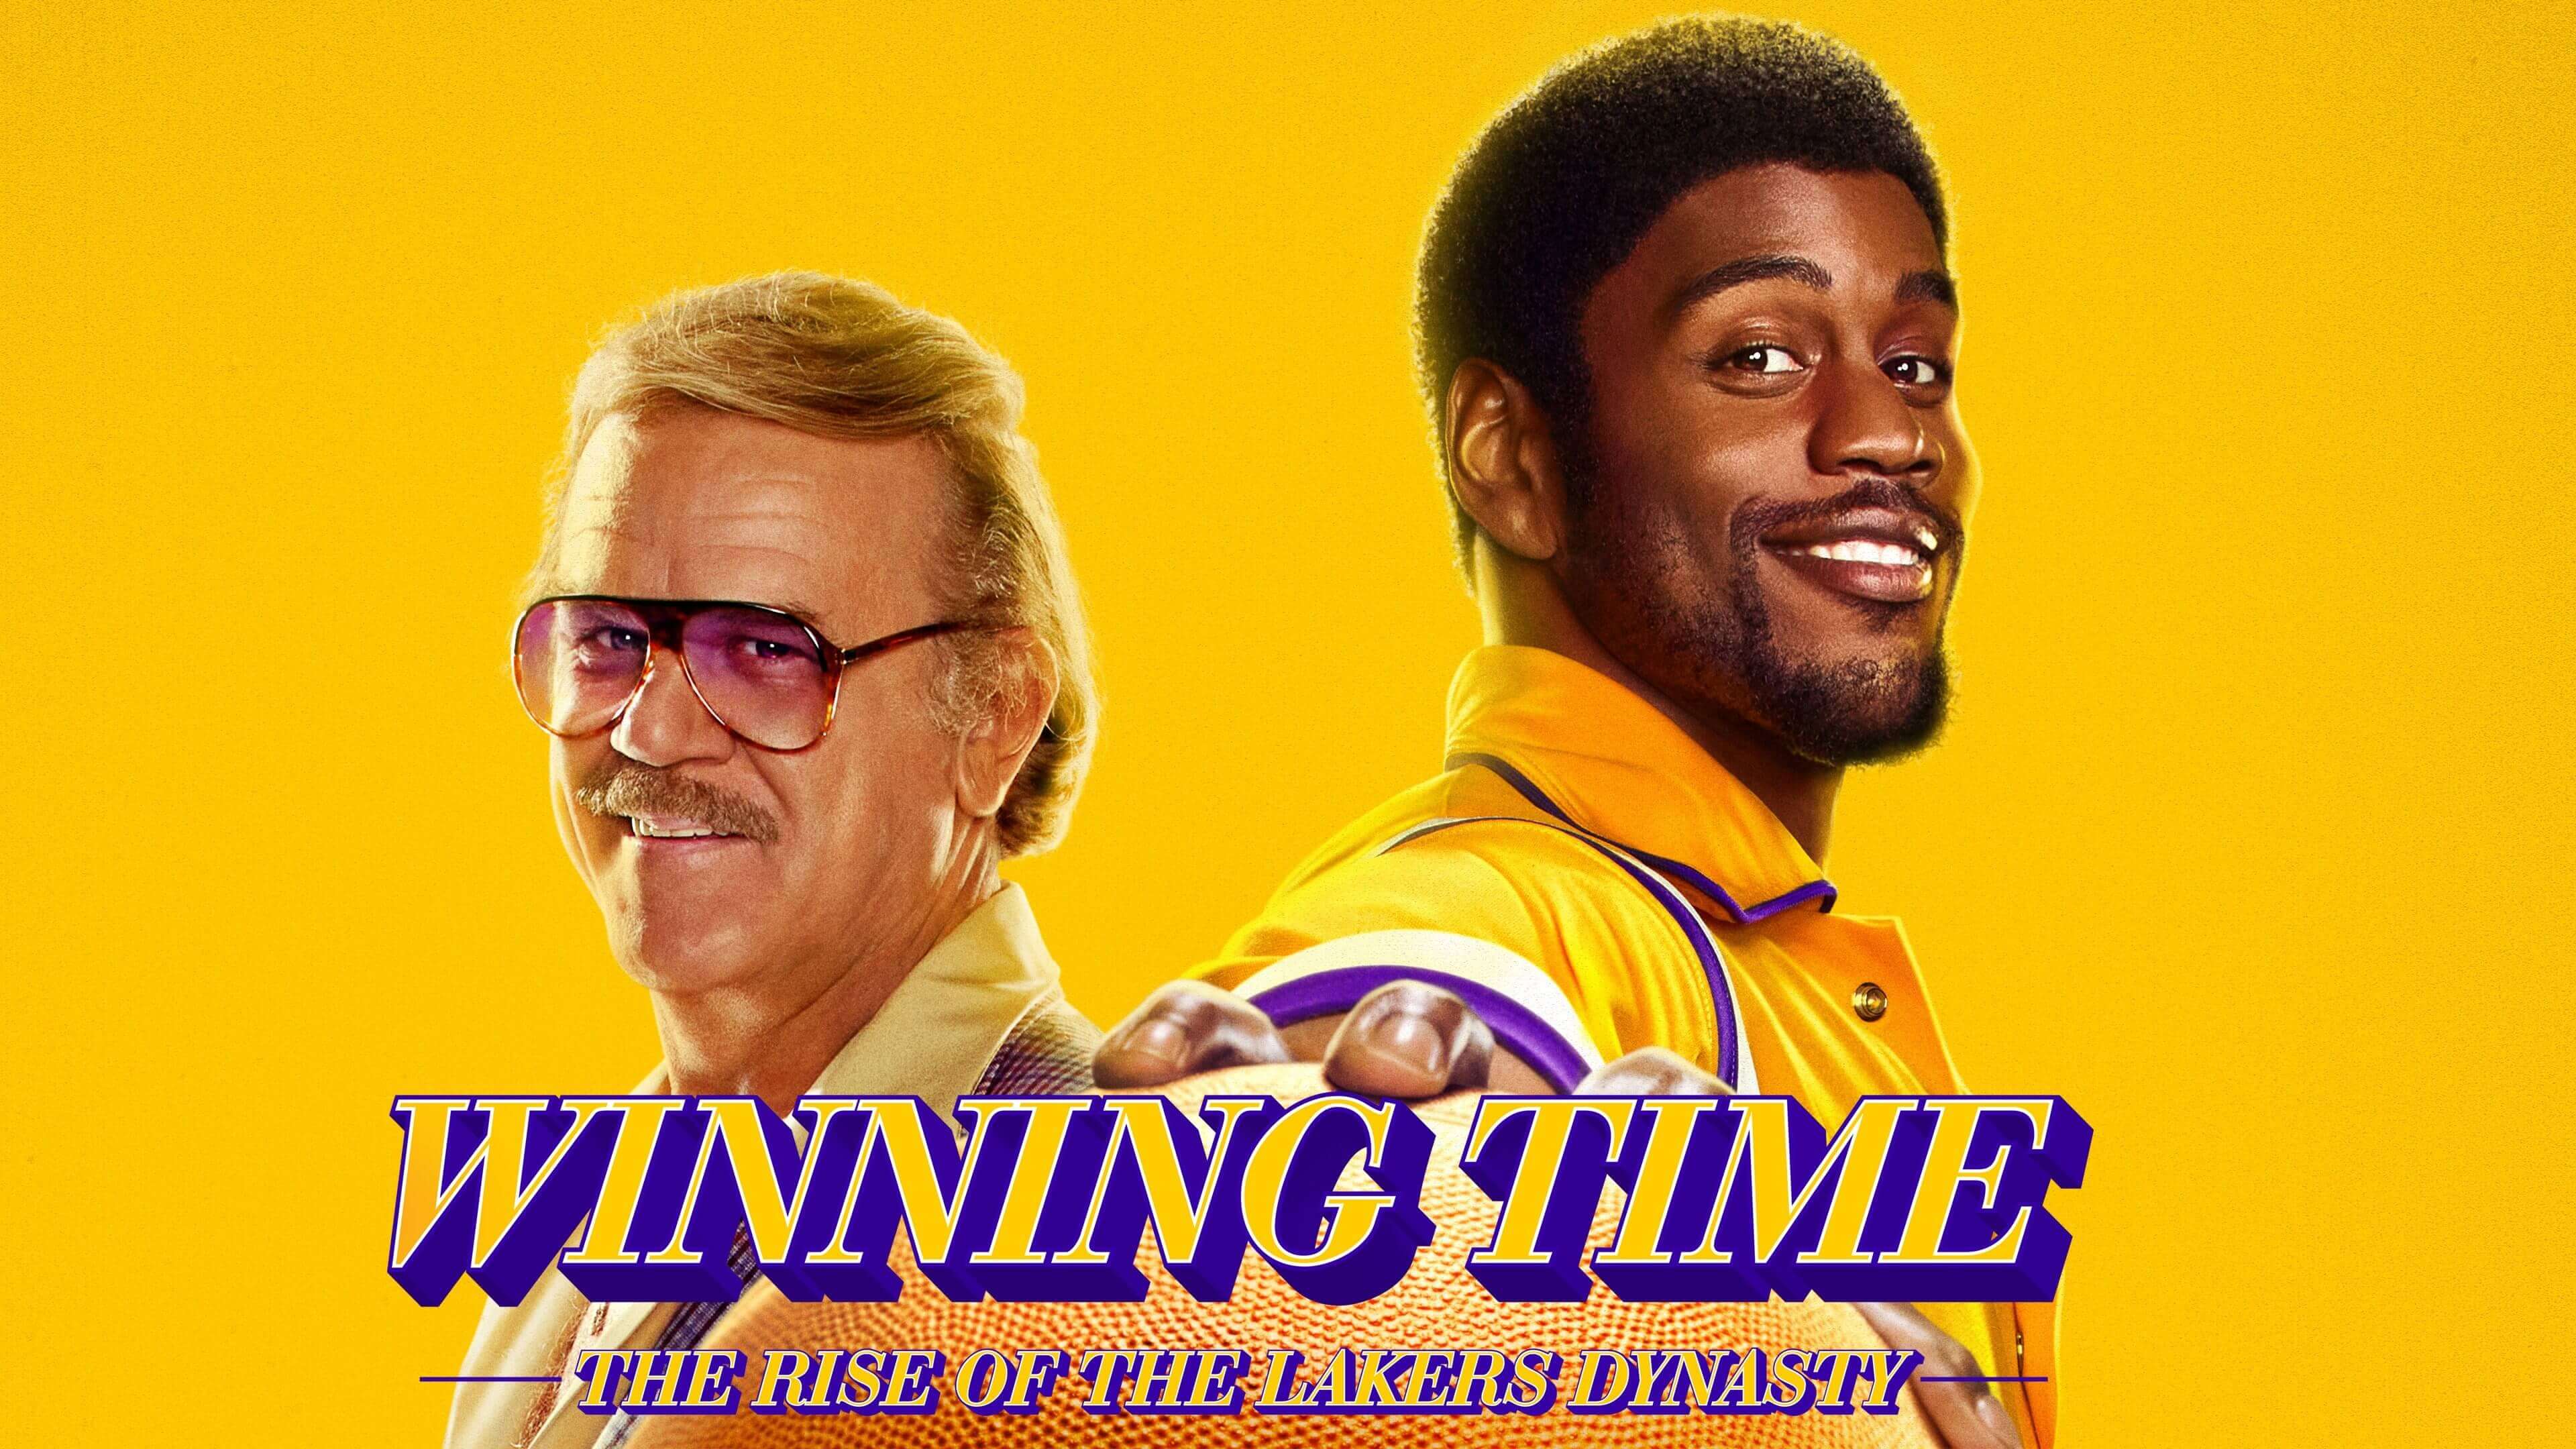 Winning Time: The Rise of the Lakers Dynasty season 2